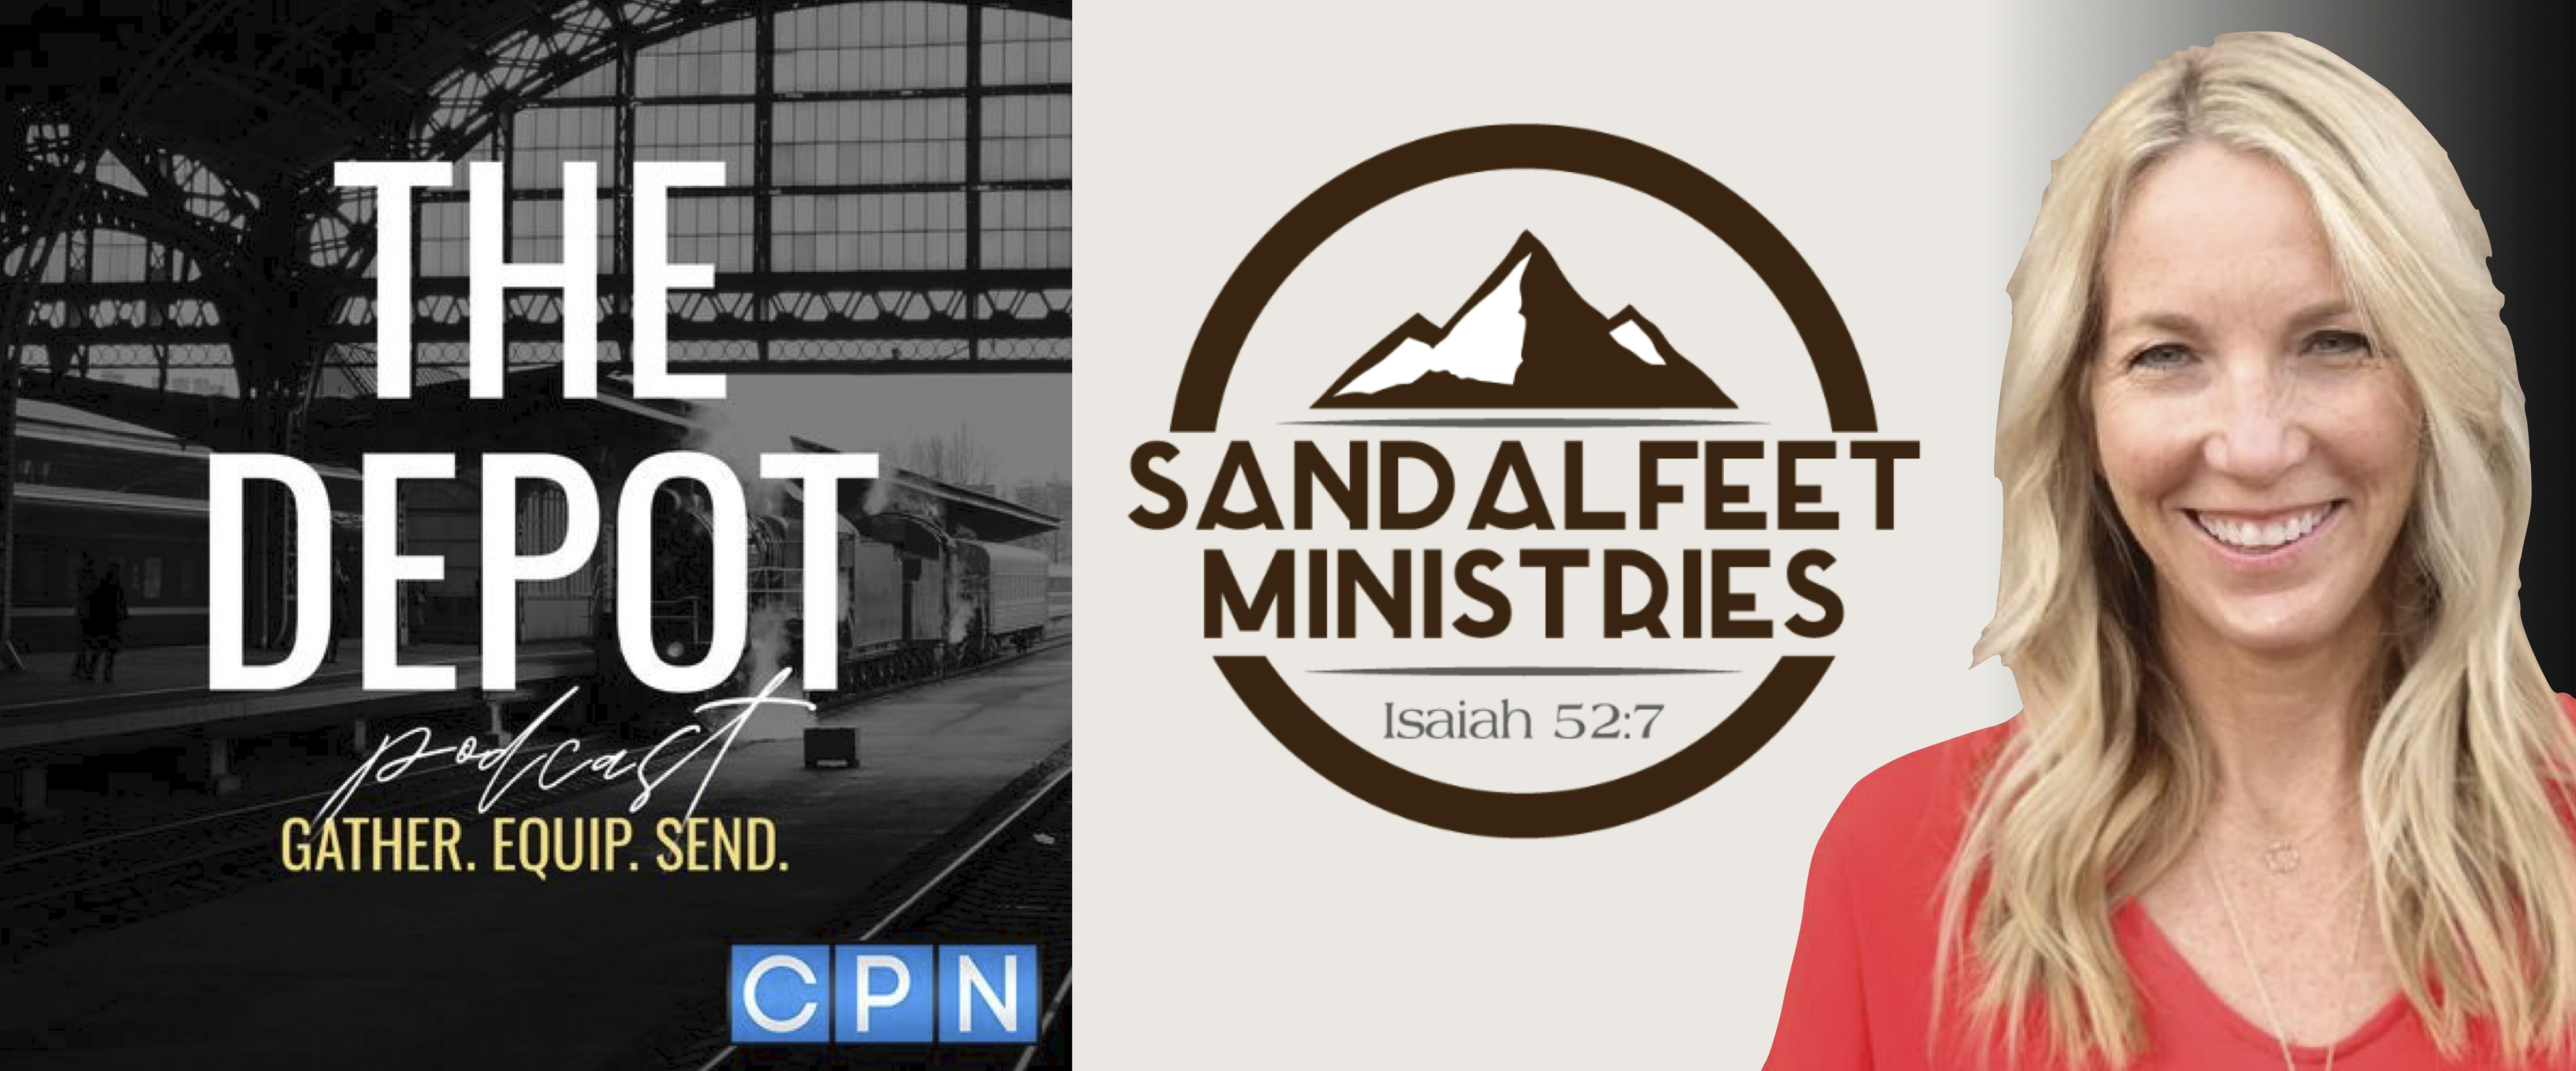 THE DEPOT PODCAST: Saved by the Sandbar (Acts 27)